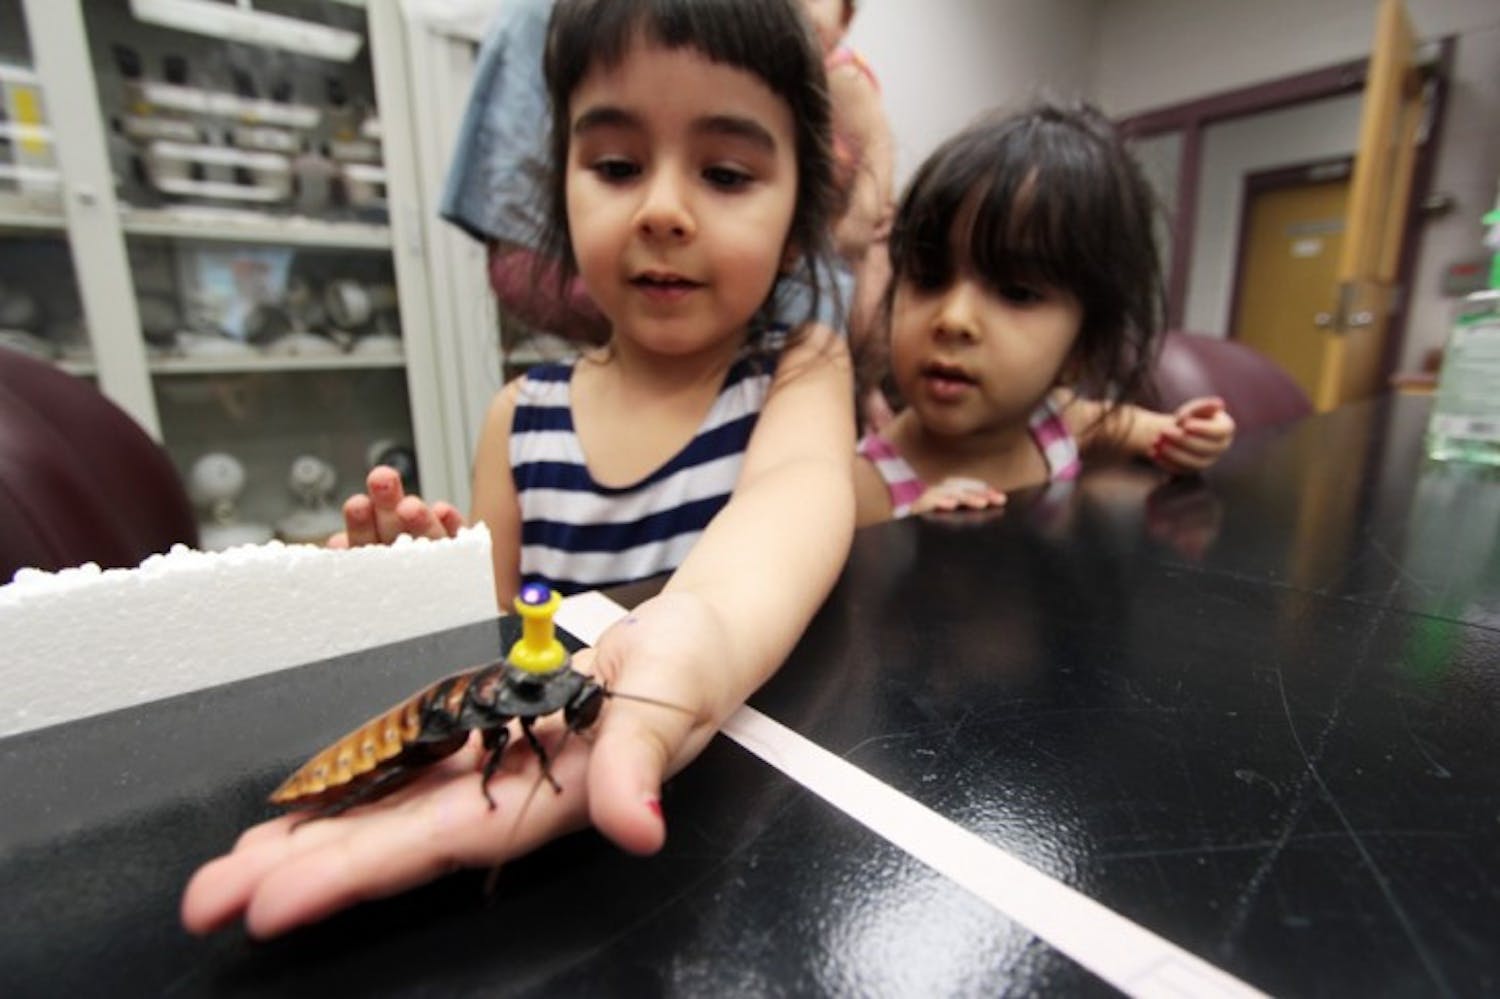 Reema Alnuaimat, 4, holds Noah, a Madagascar hissing cockroach, as her sister, Salma, 3, looks on. The cockroaches were pulling toy tractors at BugFest Open House, an event put on by the entomology and nematology department, on Wednesday evening.